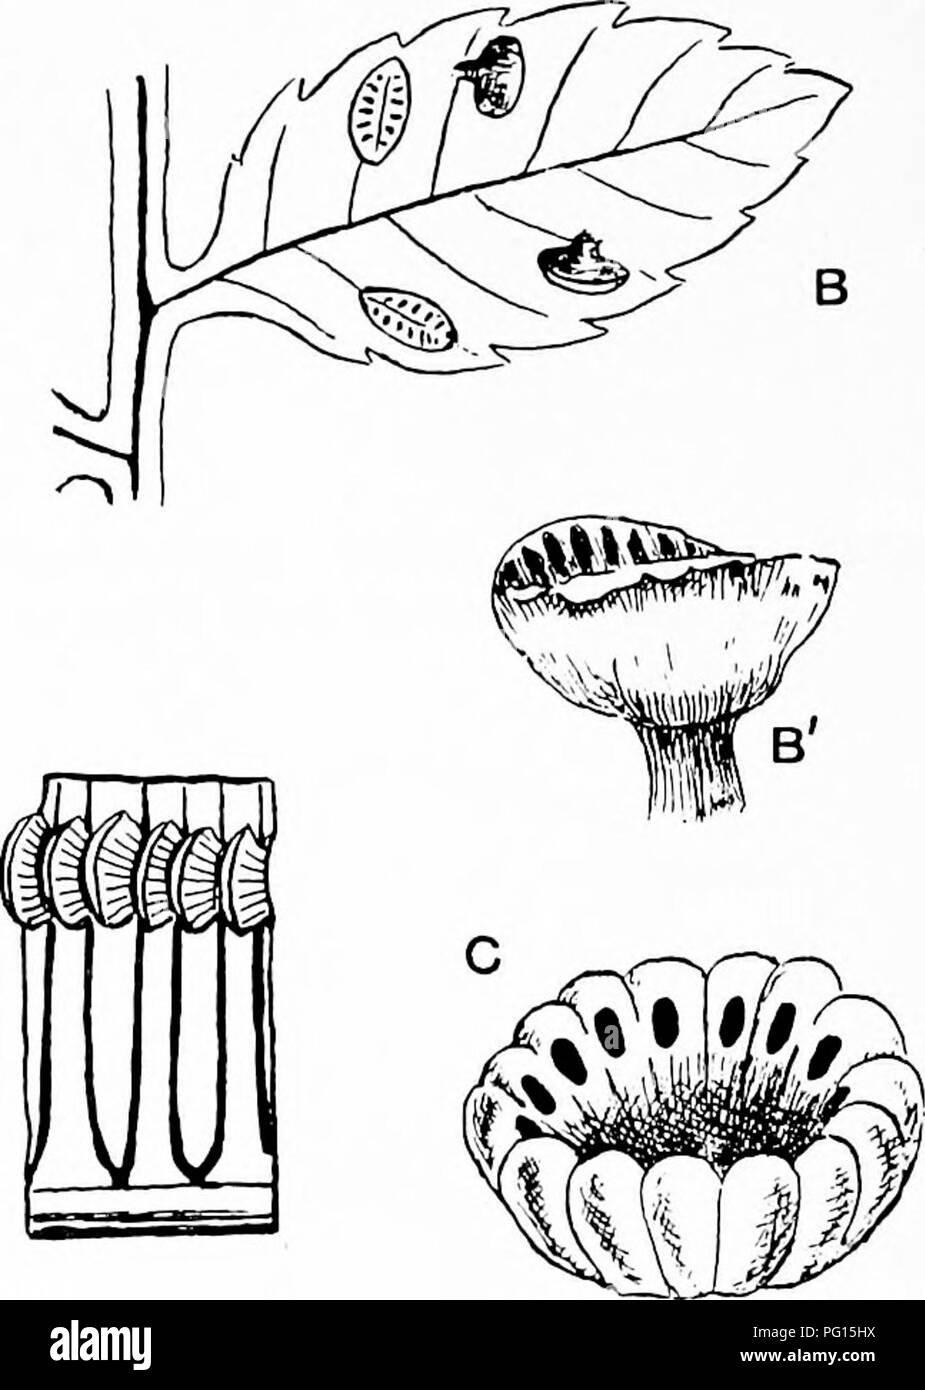 . Fossil plants : for students of botany and geology . Paleobotany. Fig. 245. A. Marattia fraxinea. A'. A single synangium showing the two valves and pores of the sporangial compartments. B, B'. it/. Kaulfussii. C, Kaulfussia (synangium showing pores of sporangial compart- ments). D, B. Marattiopsis Milnsteri. (C, after Hooker; D, E, after Schimper.) composed of two valves, which on ripening come apart and expose two rows of pores formed by the apical dehiscence of the sporangial com- partments (fig. 245, A', B). In Marattia Kaulfussii the sori are attached to the lamina by a short stalk (fig. Stock Photo